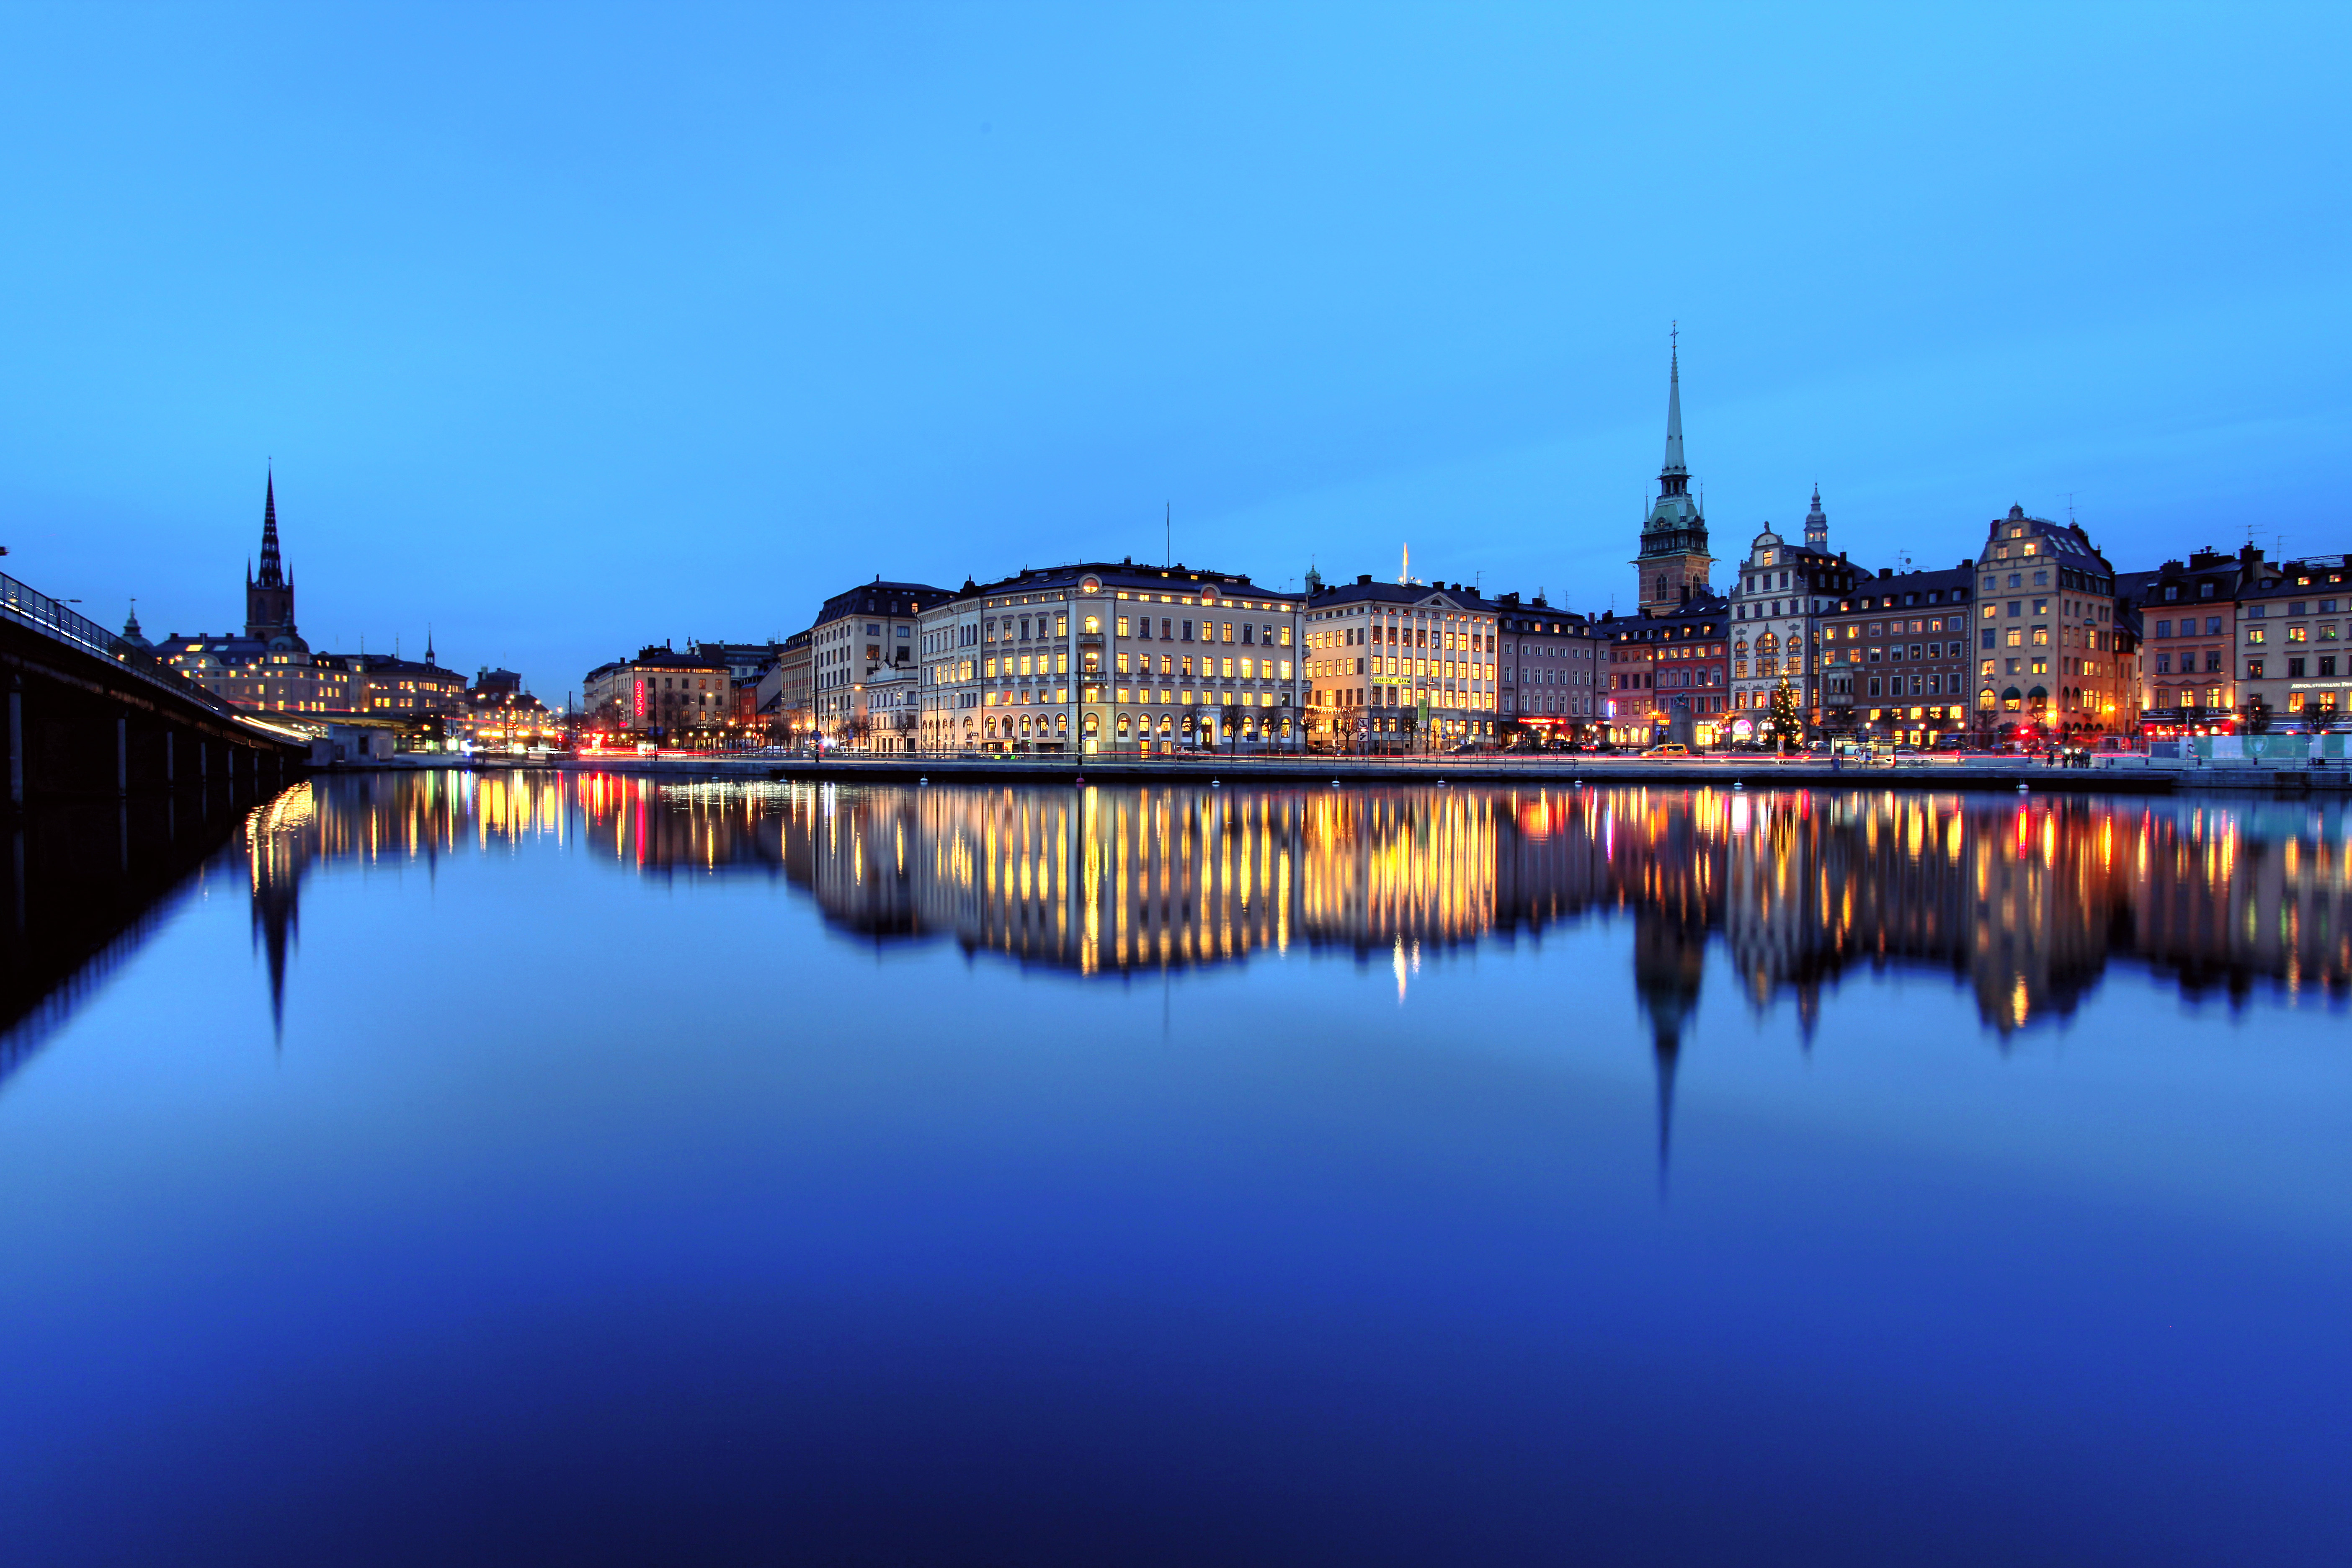 man made, stockholm, building, city, night, reflection, sweden, water, cities